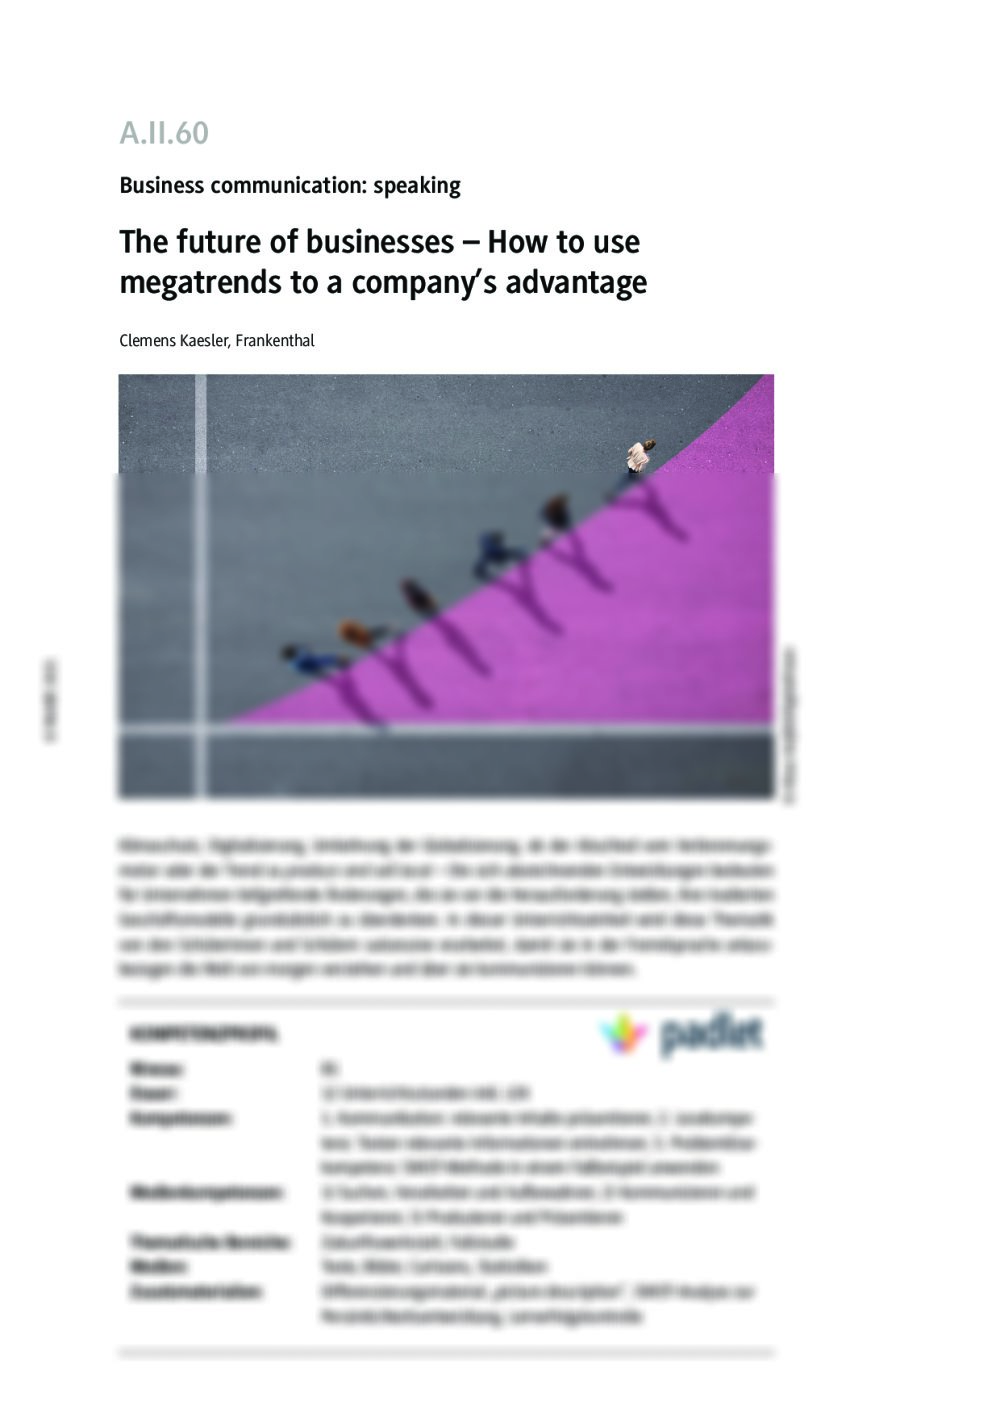 The future of businesses – Megatrends - Seite 1